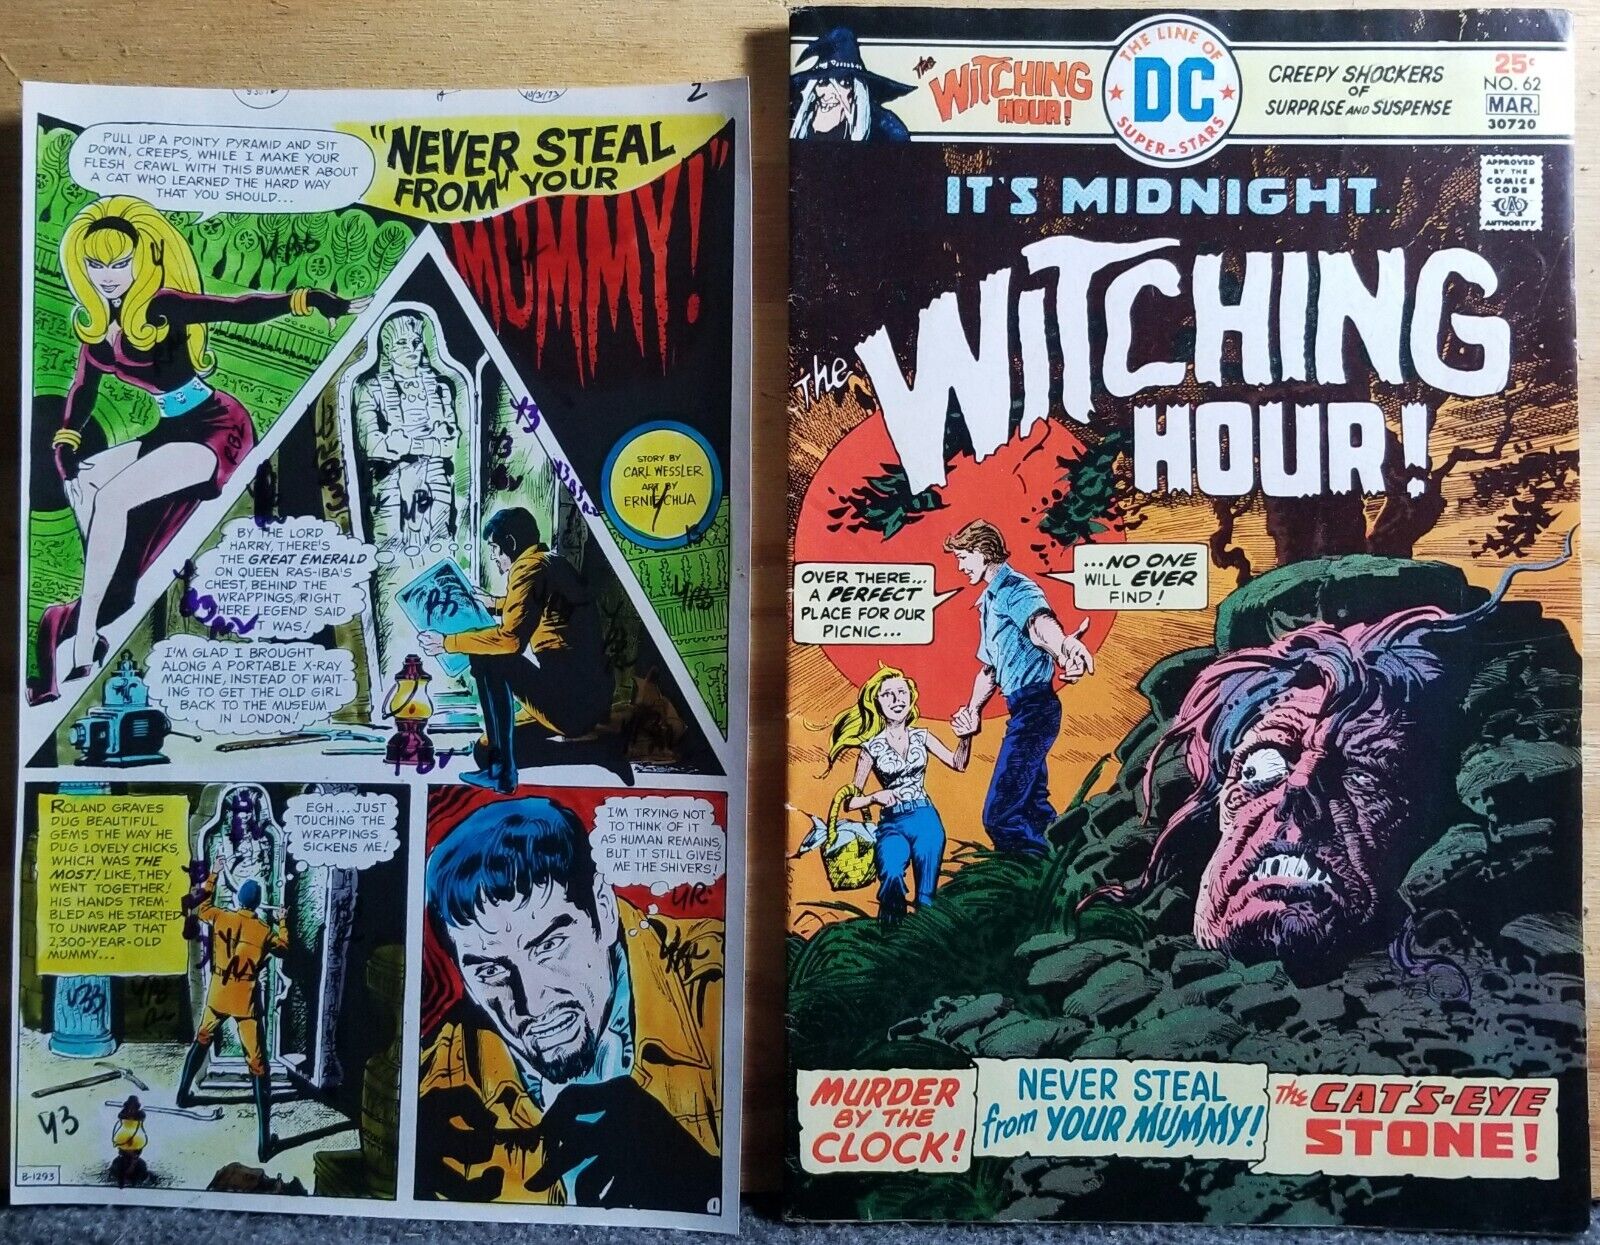 COMPLETE SET OF HAND-COLORED PROOFS - WITCHING HOUR #62 DC COMICS - 1976 - RARE